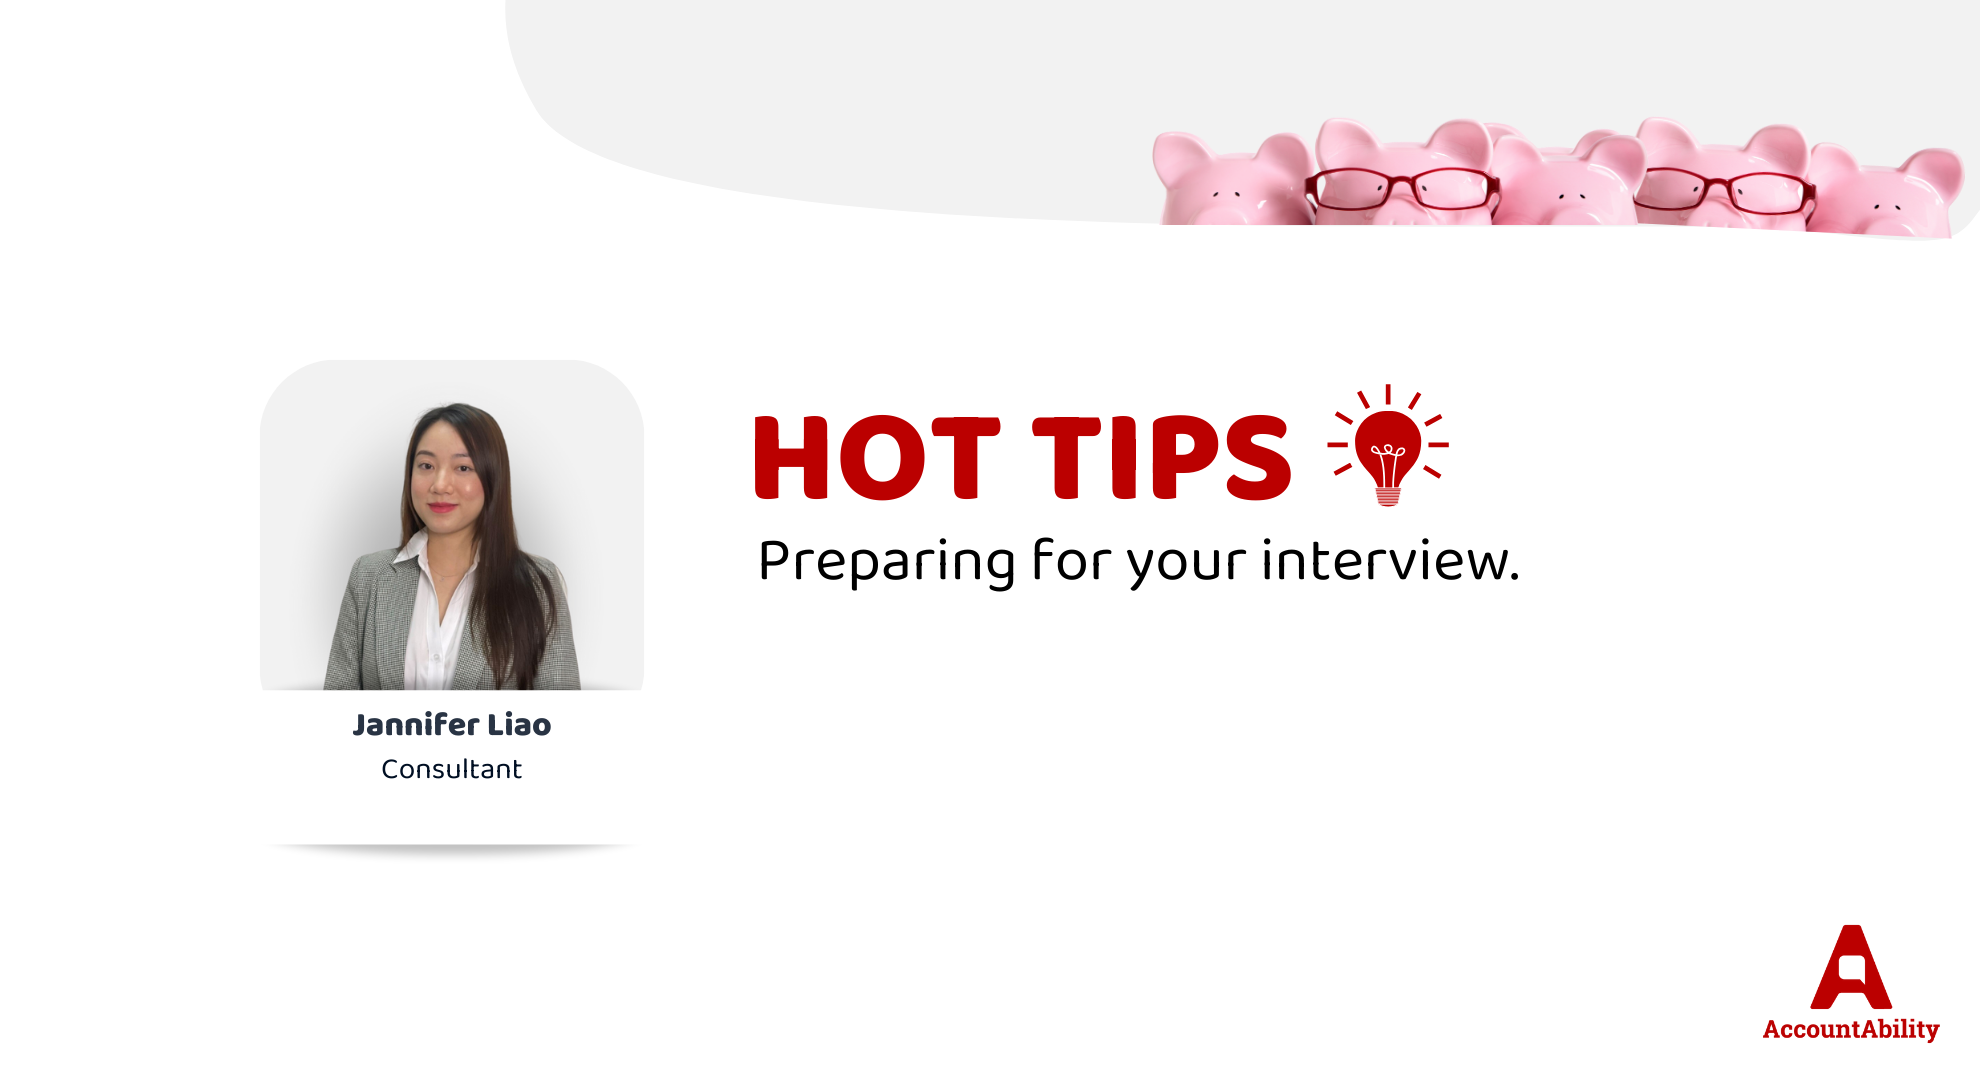 Preparing for your interview